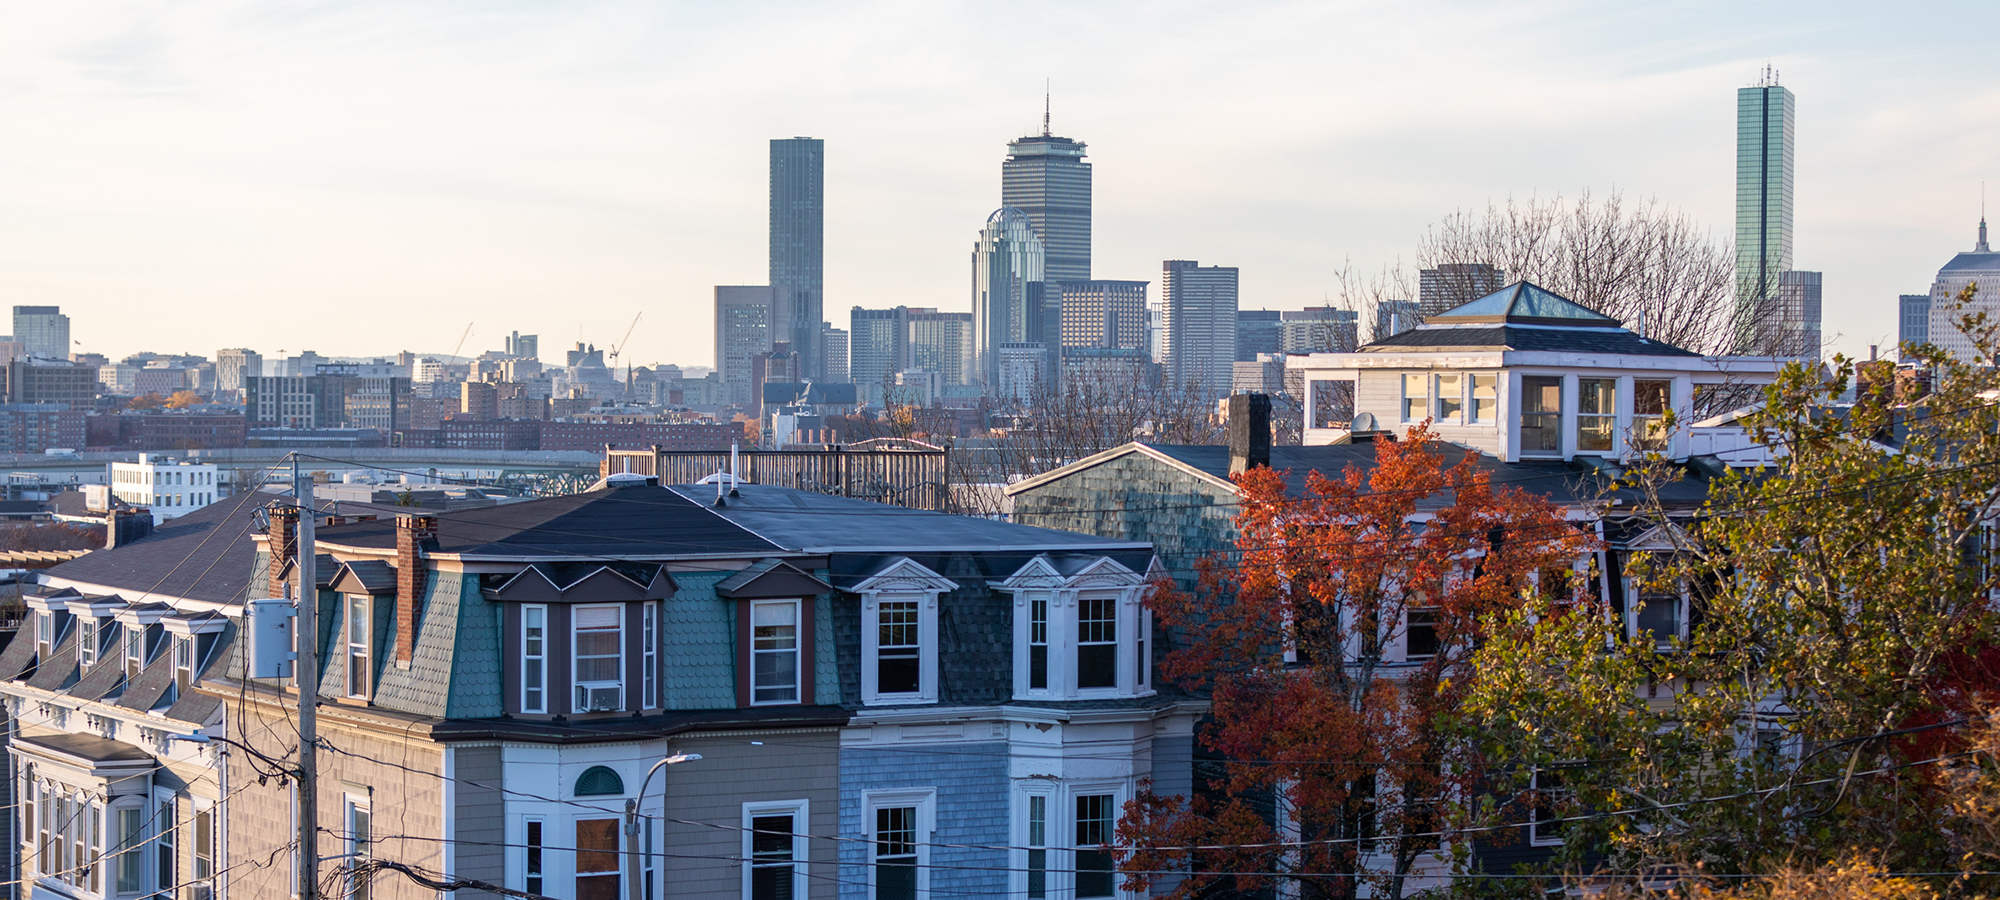 The Boston skyline from Dorchester Heights in South Boston